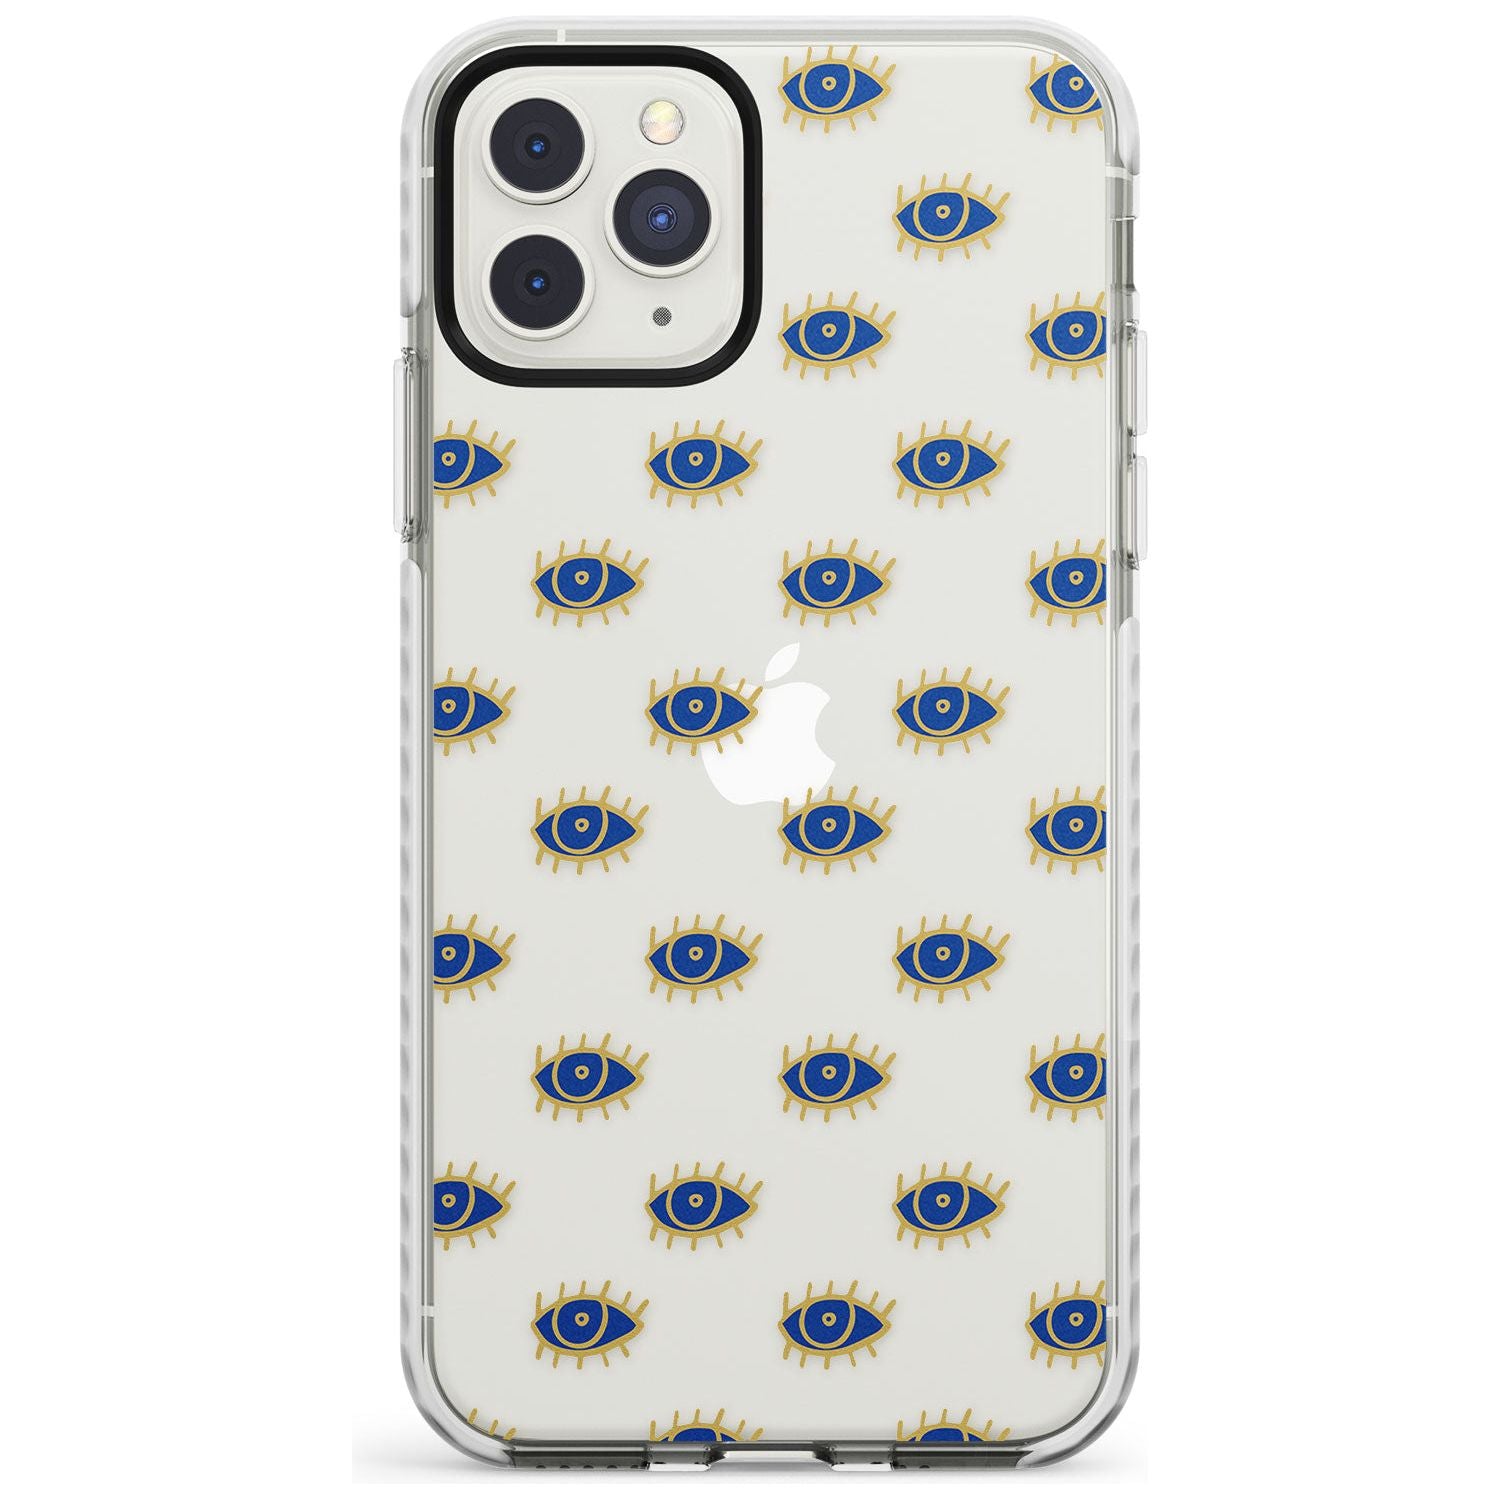 Gold Eyes (Clear) Psychedelic Eyes Pattern Impact Phone Case for iPhone 11 Pro Max